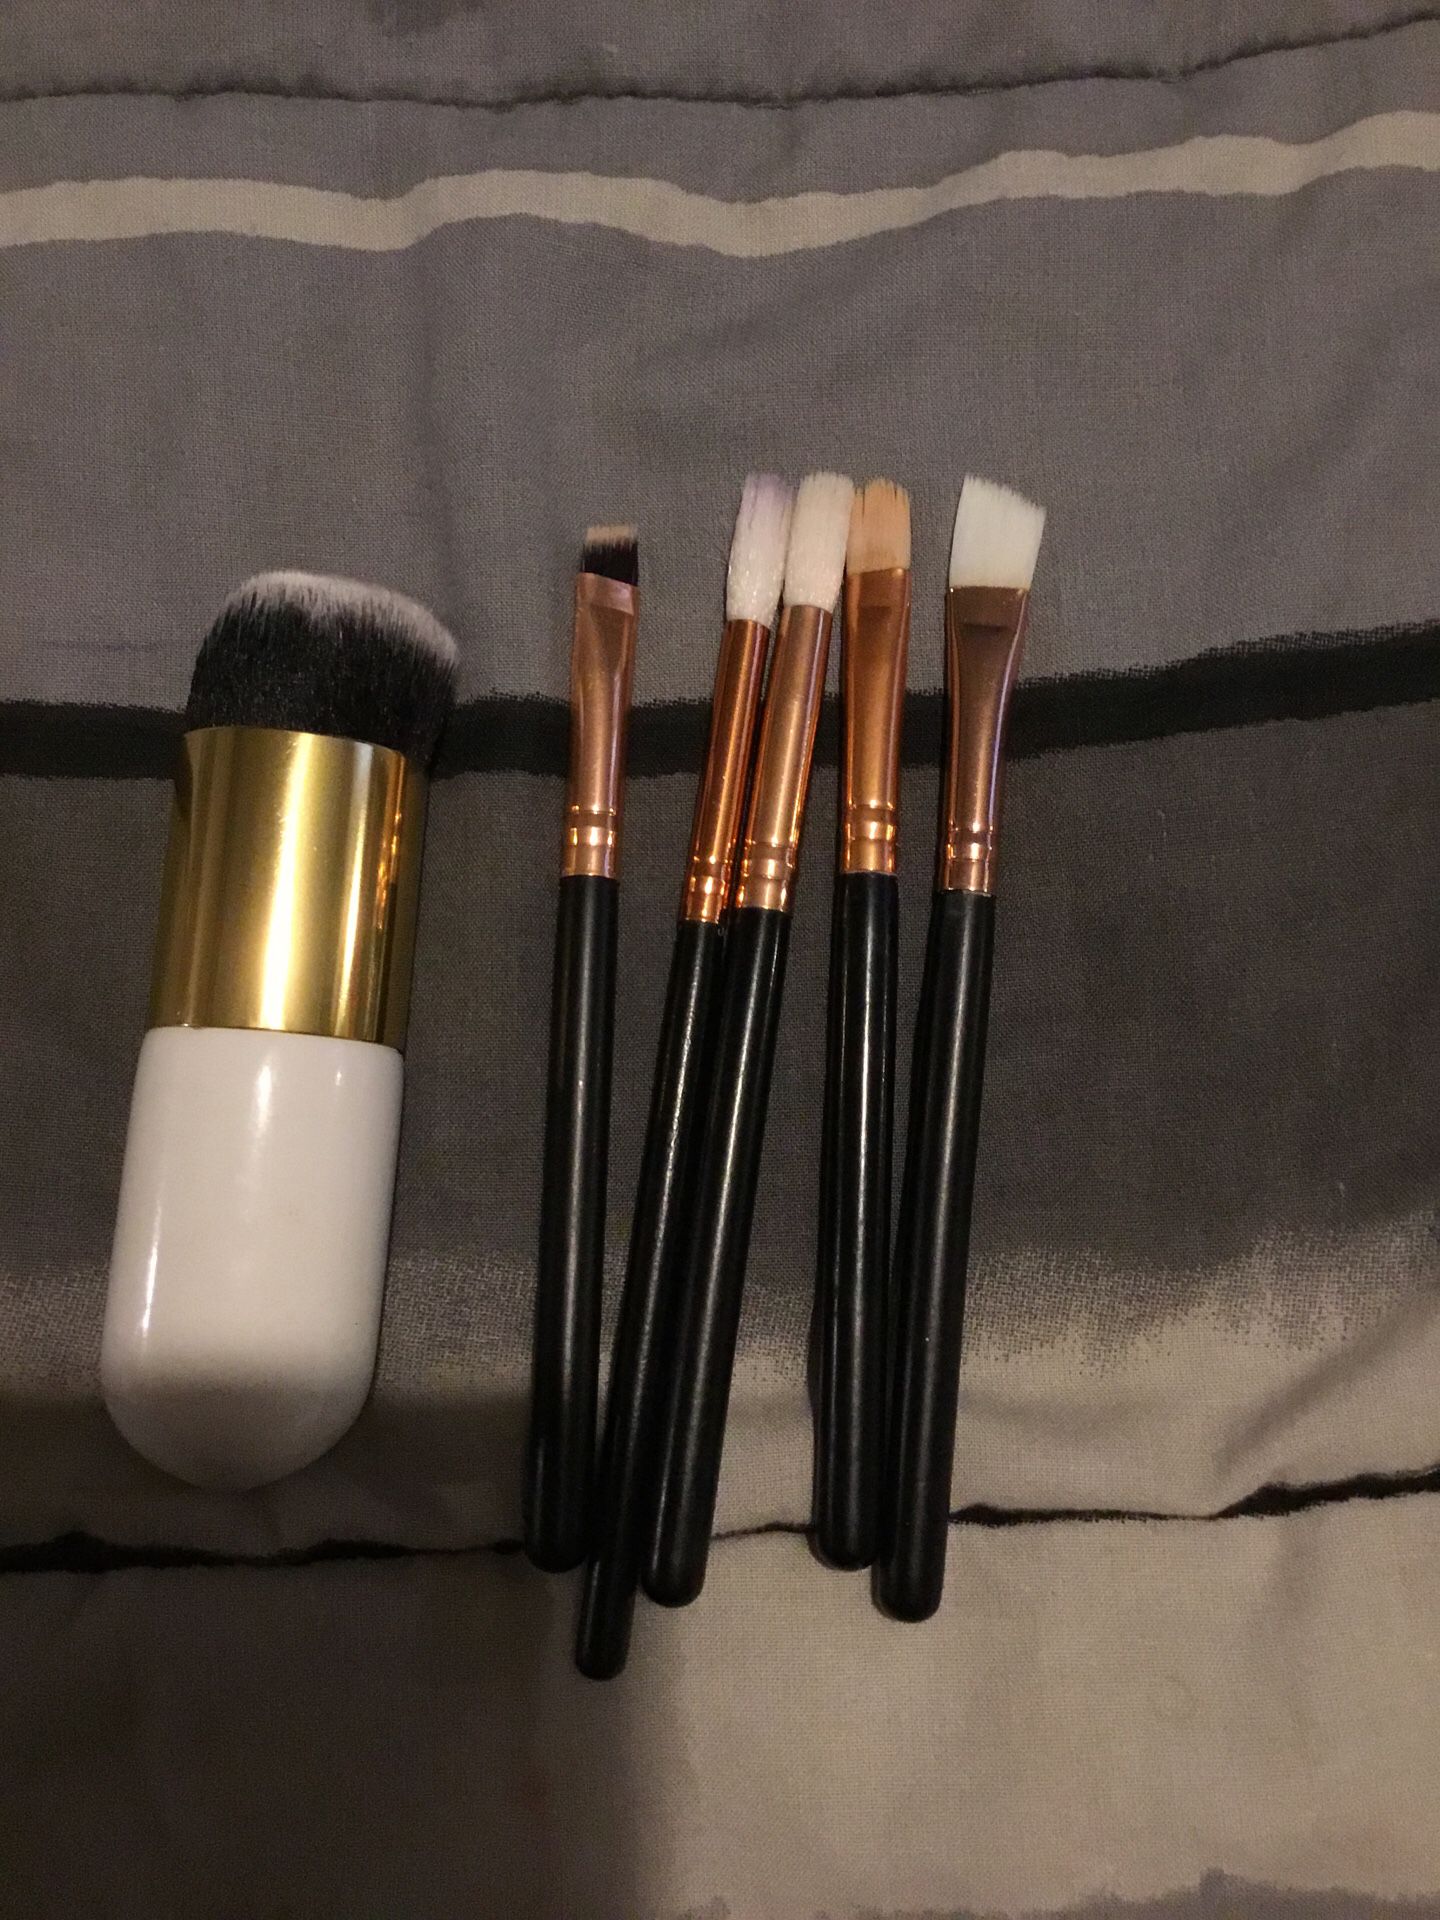 Free with a purchase of 1 other makeup brushes